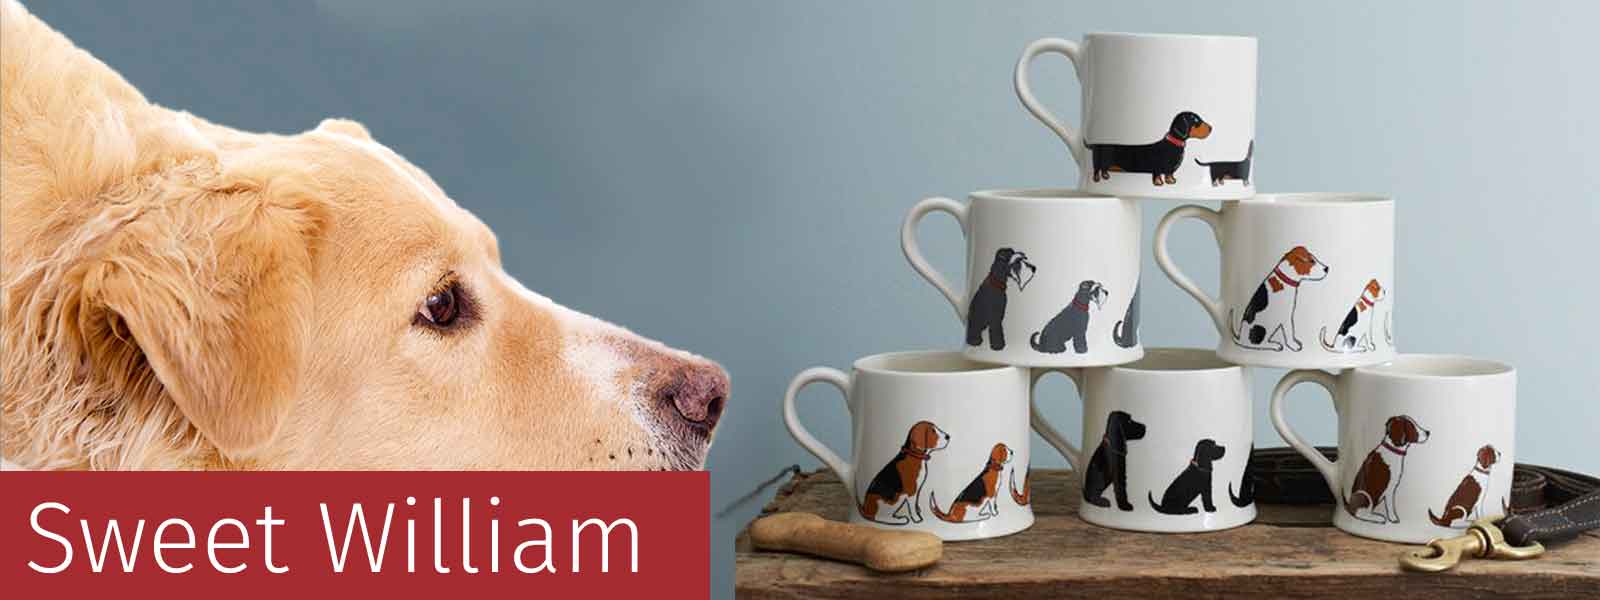 Dog Lover Gifts available at Dog Krazy Gifts – We have a great range of Dog Themed Sweet William Gifts available at www.dogkrazygifts.co.uk